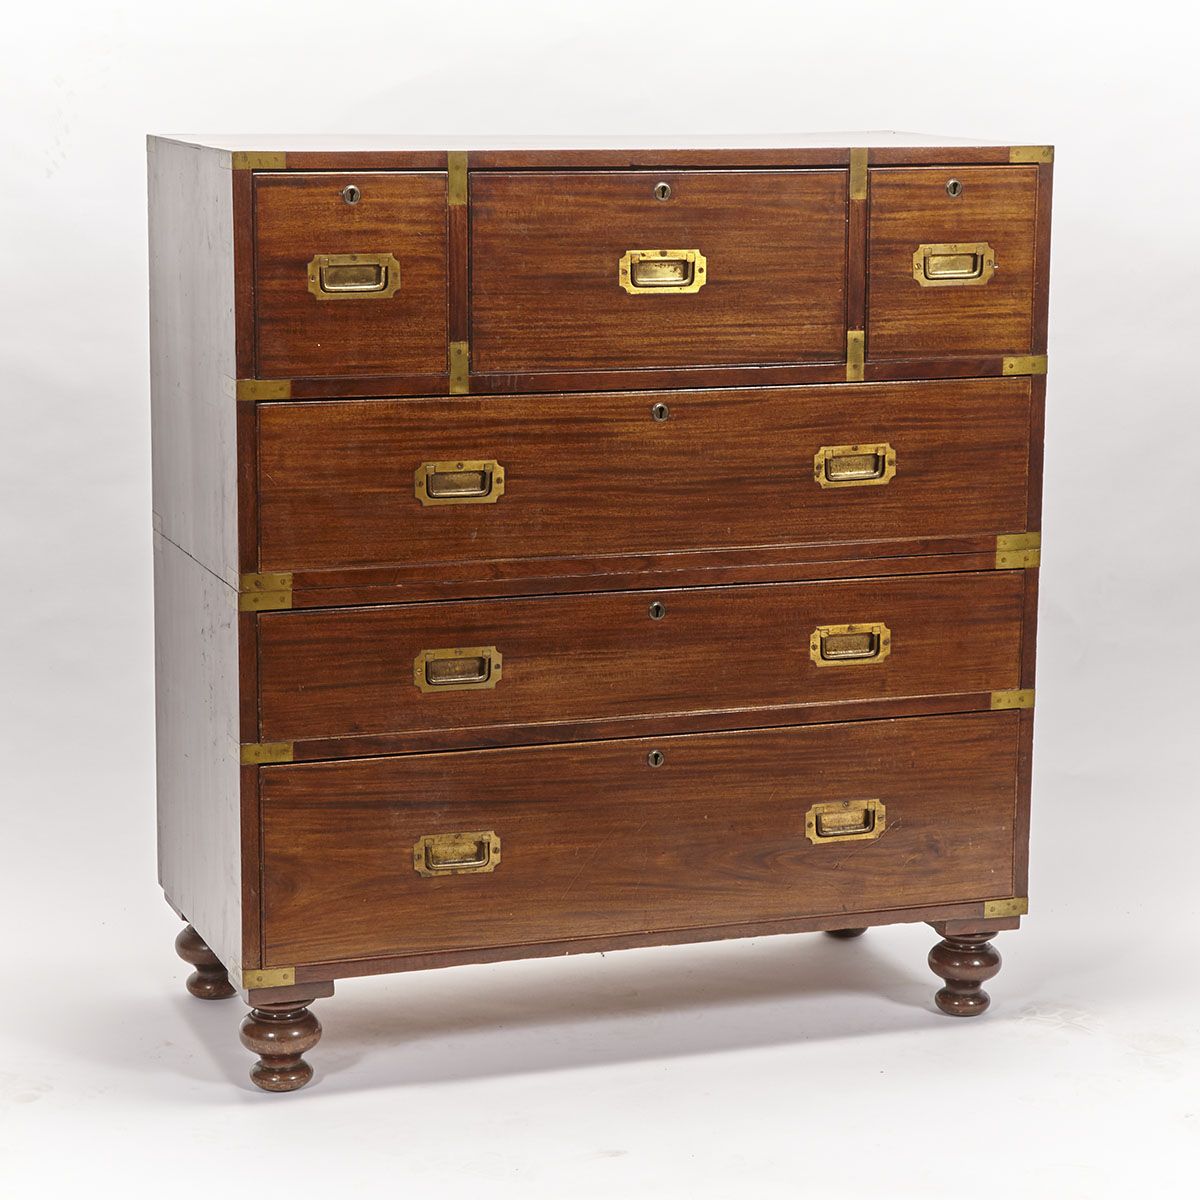 Victorian Brass Bound Mahogany Campaign Chest, late 19th century